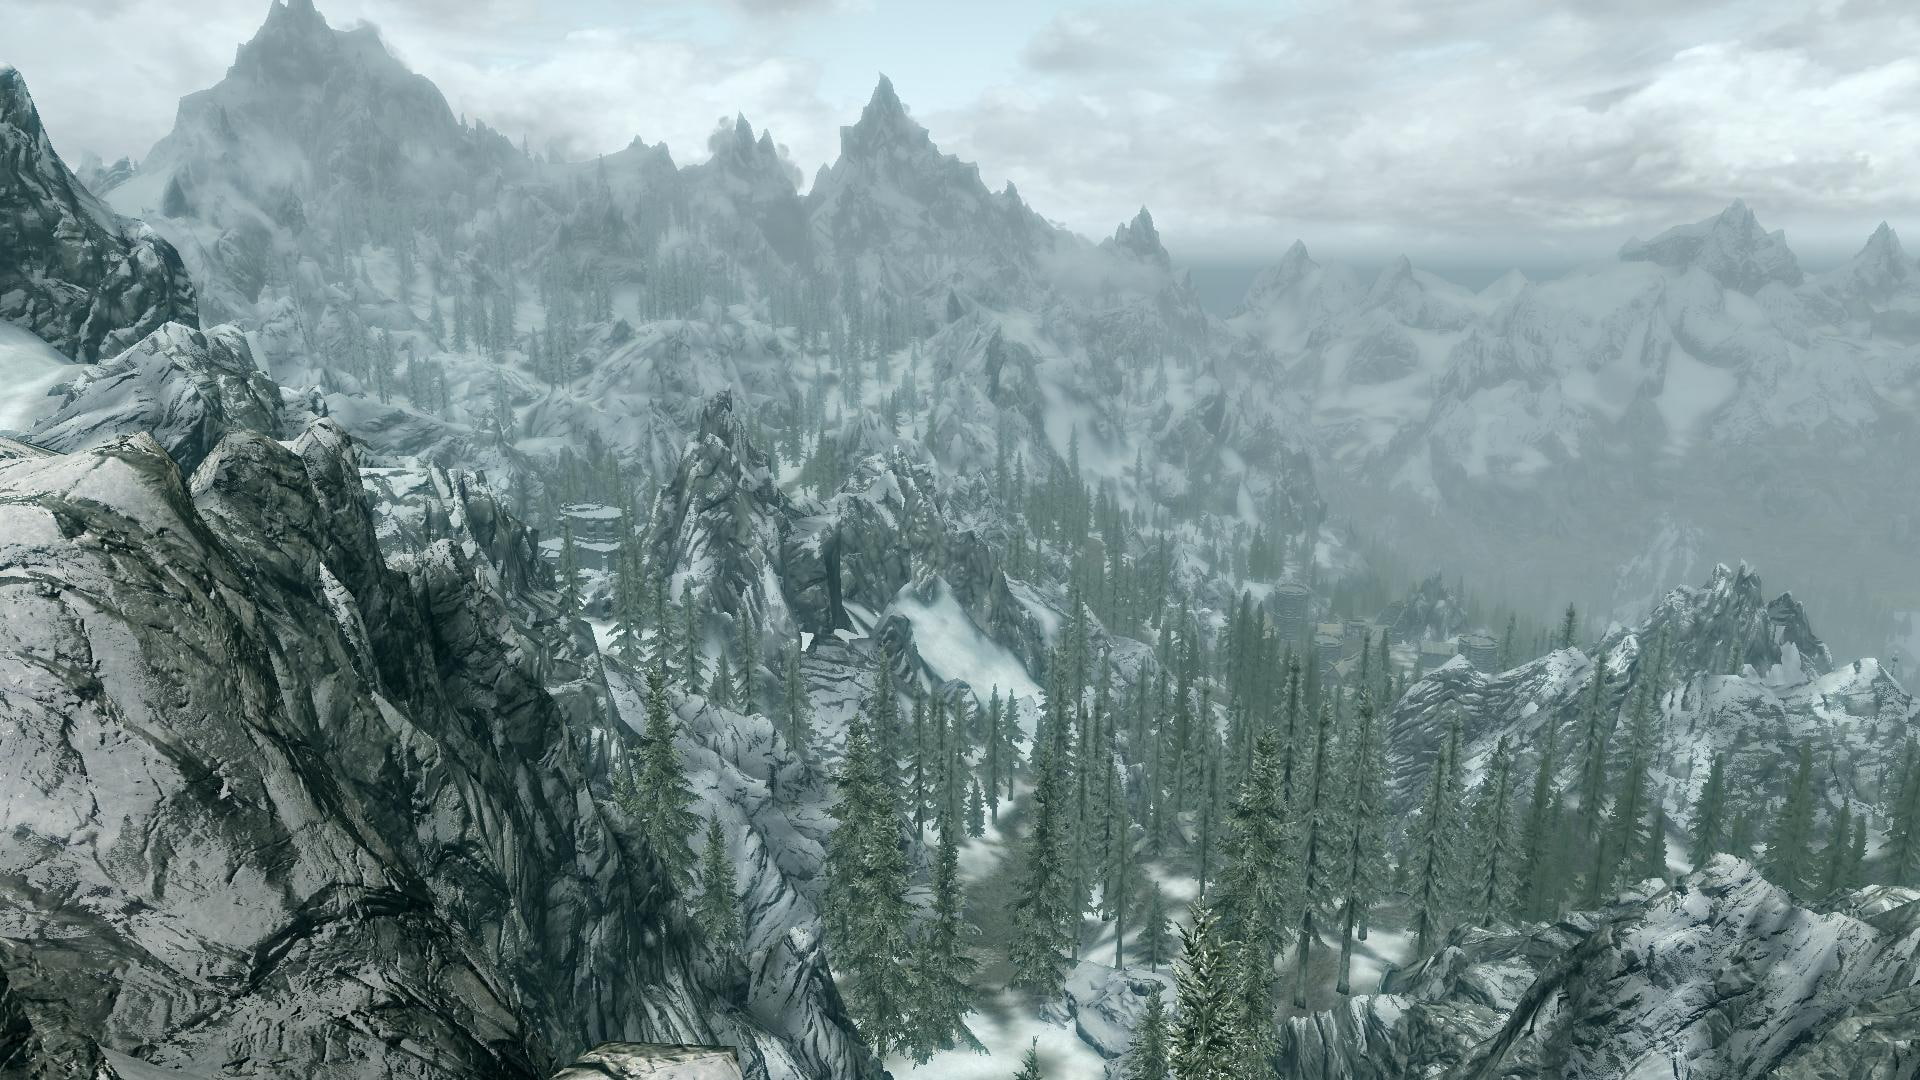 Skyrim: On Top Of The World, forest, landscape, mountains, snow